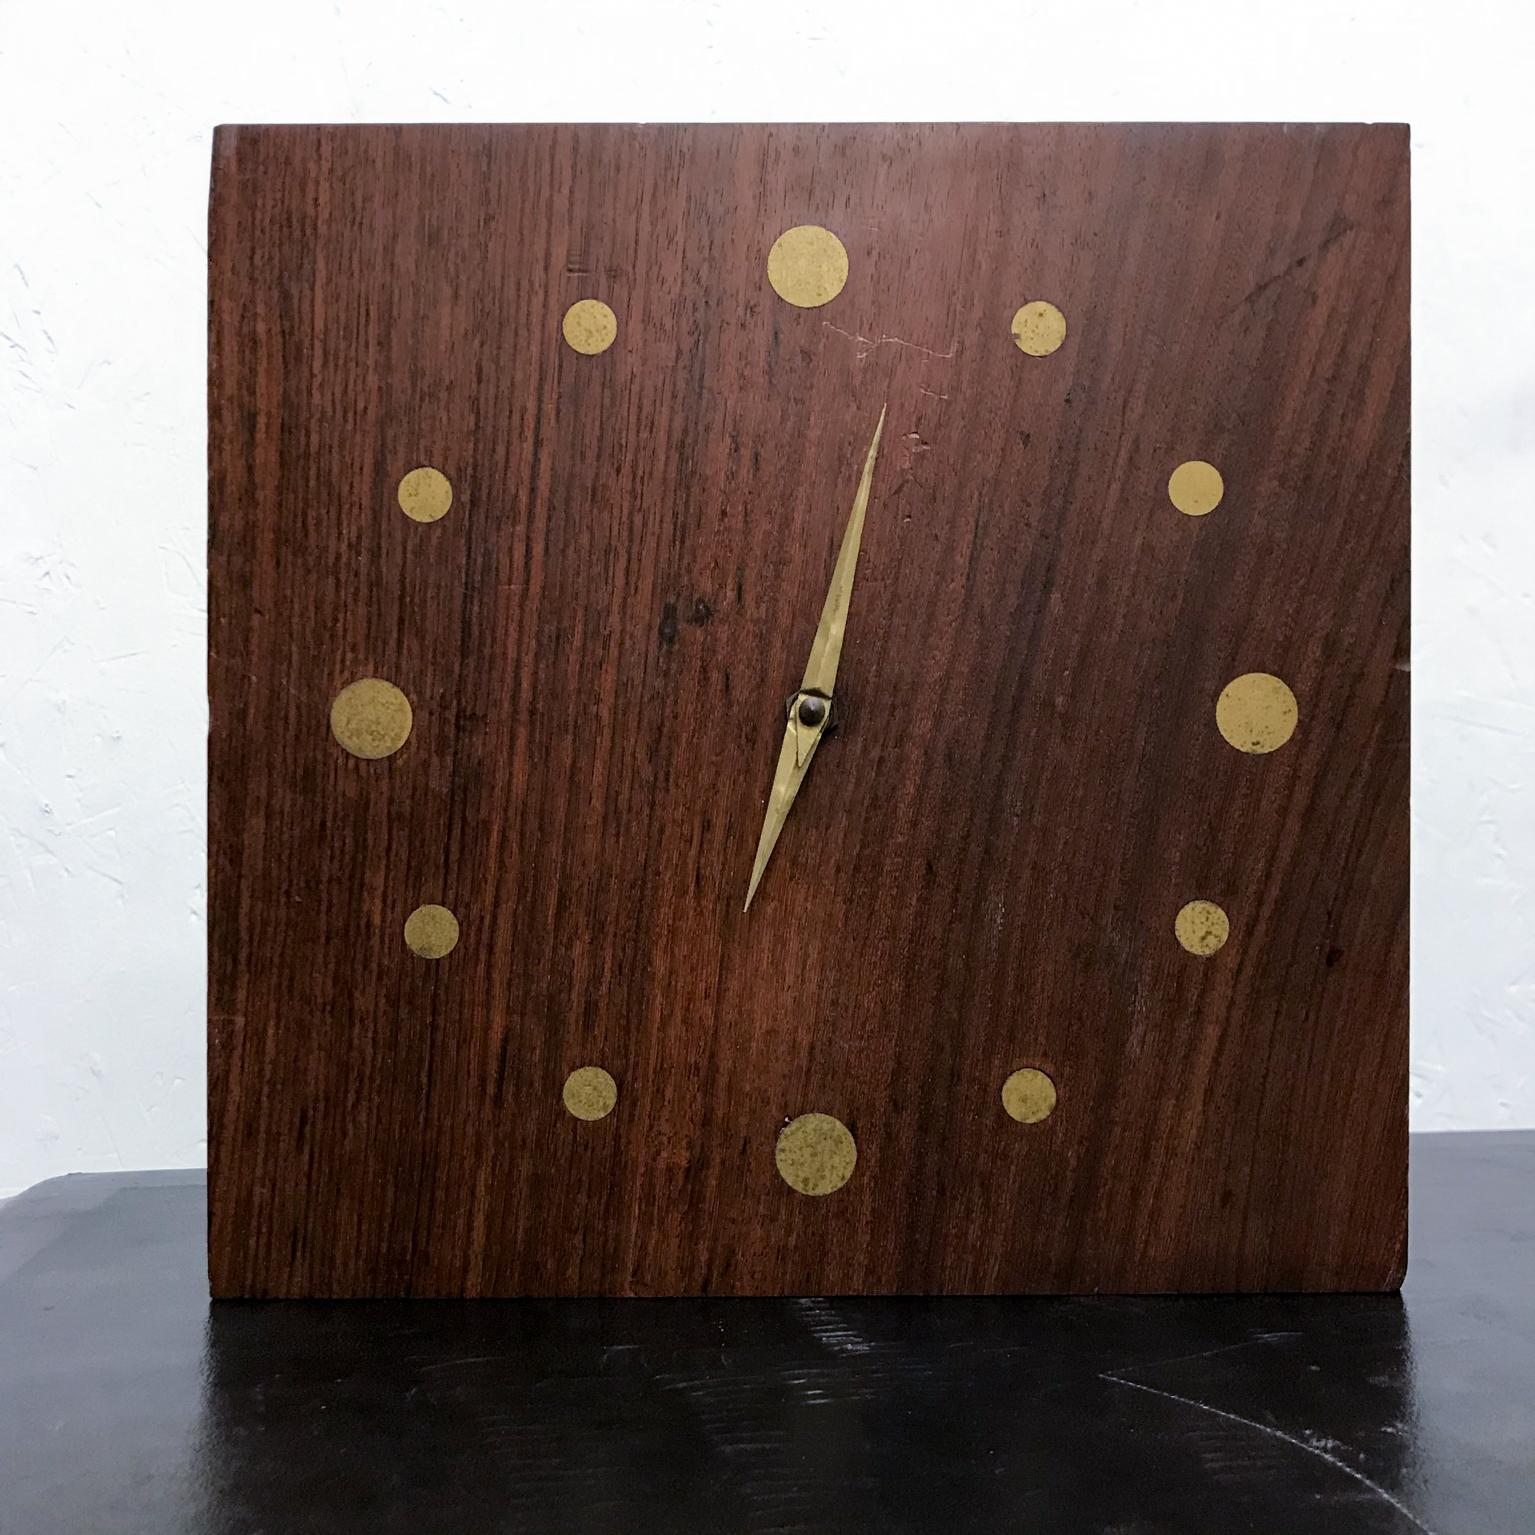 American Solid Rosewood and Brass Wall Clock Mid-Century Modern Period